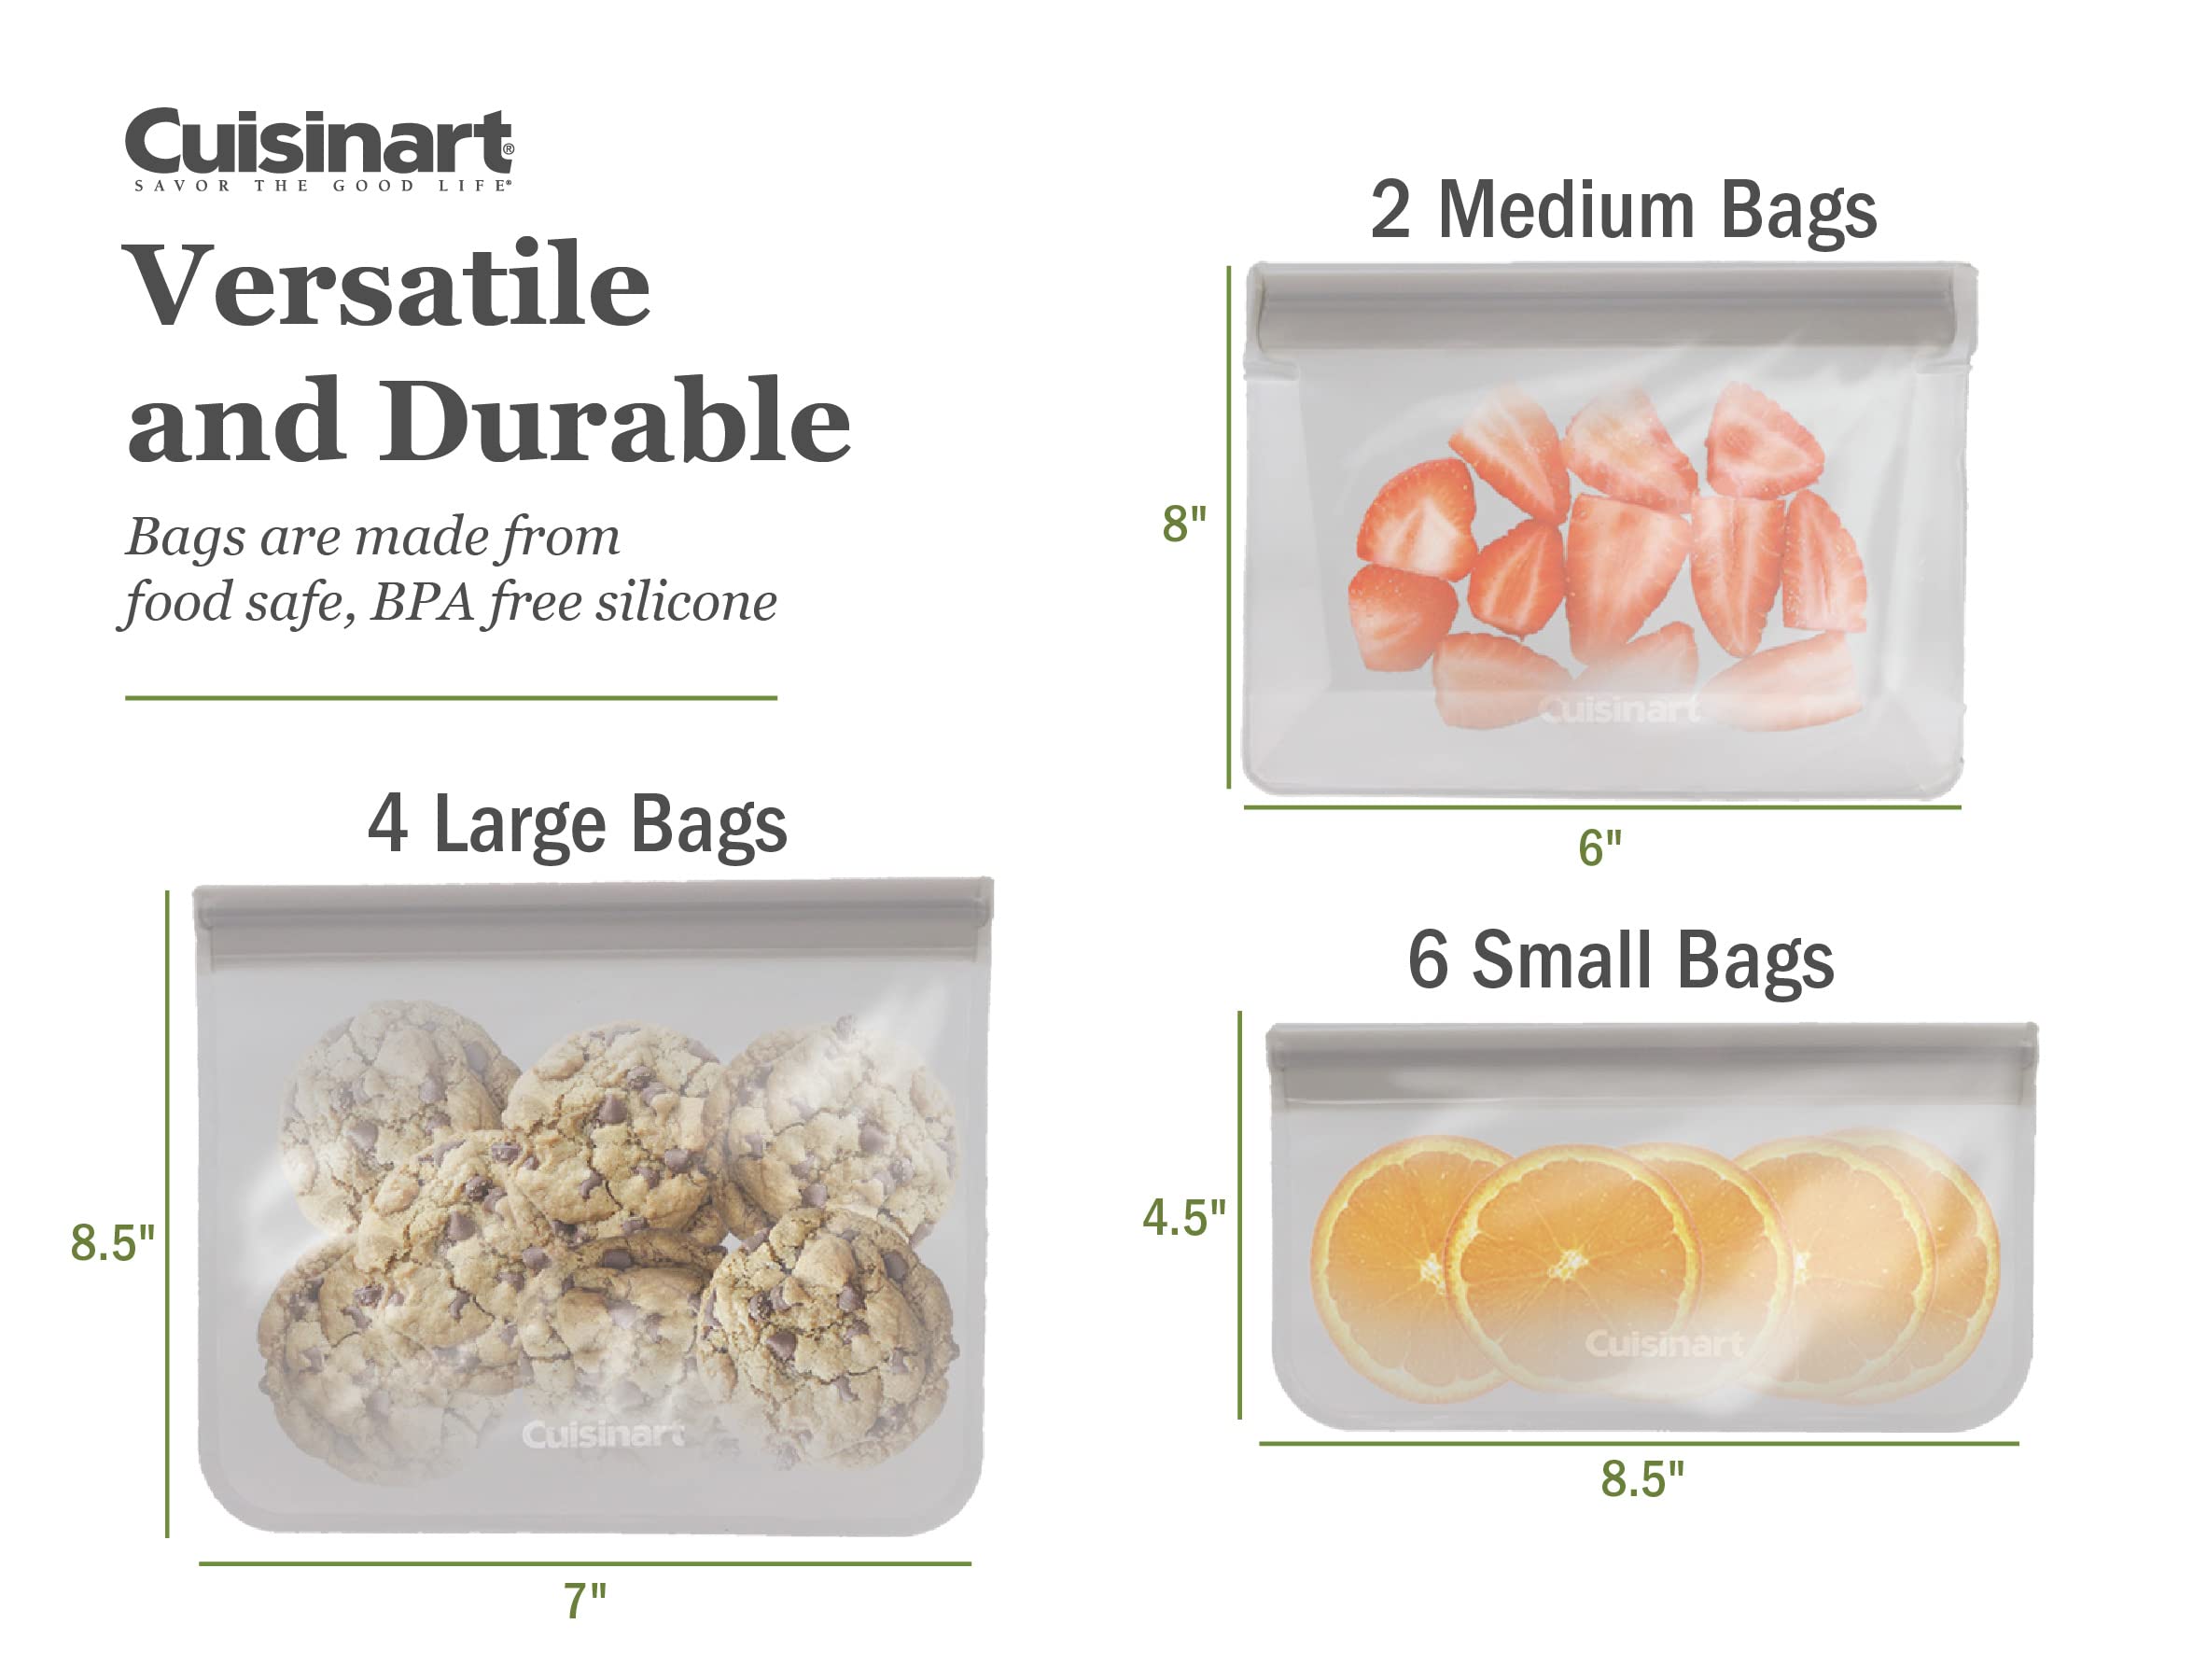 Cuisinart Reusable Food Storage Bags, 12 Pack Gray - Resealable Bags for Food, Leftovers, & Snacks to Store, Freeze or Refrigerate - BPA Free Flat Freezer Bags - Includes Small, Medium & Large